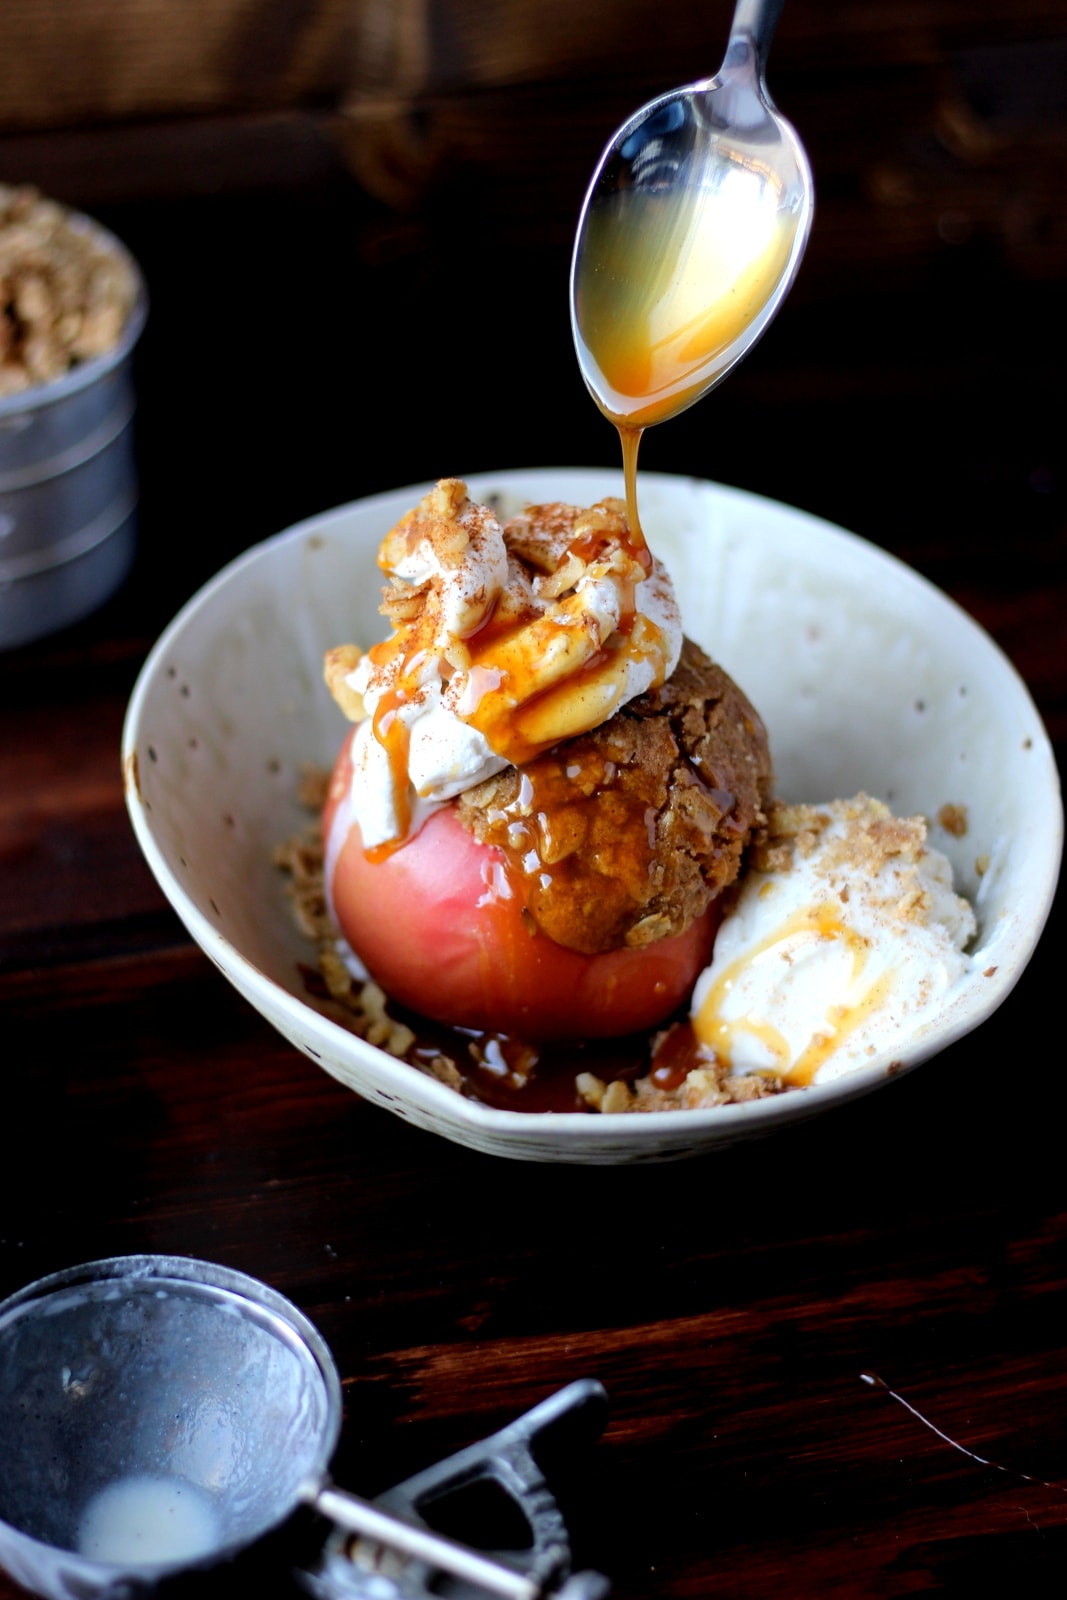 Stuffed Apples + Cardamom Whipped Cream and Vanilla Bean Ice Cream topped with Walnuts and Caramel Sauce. The perfect dessert for fall! thewoodenskillet.com #foodphotography #foodstyling